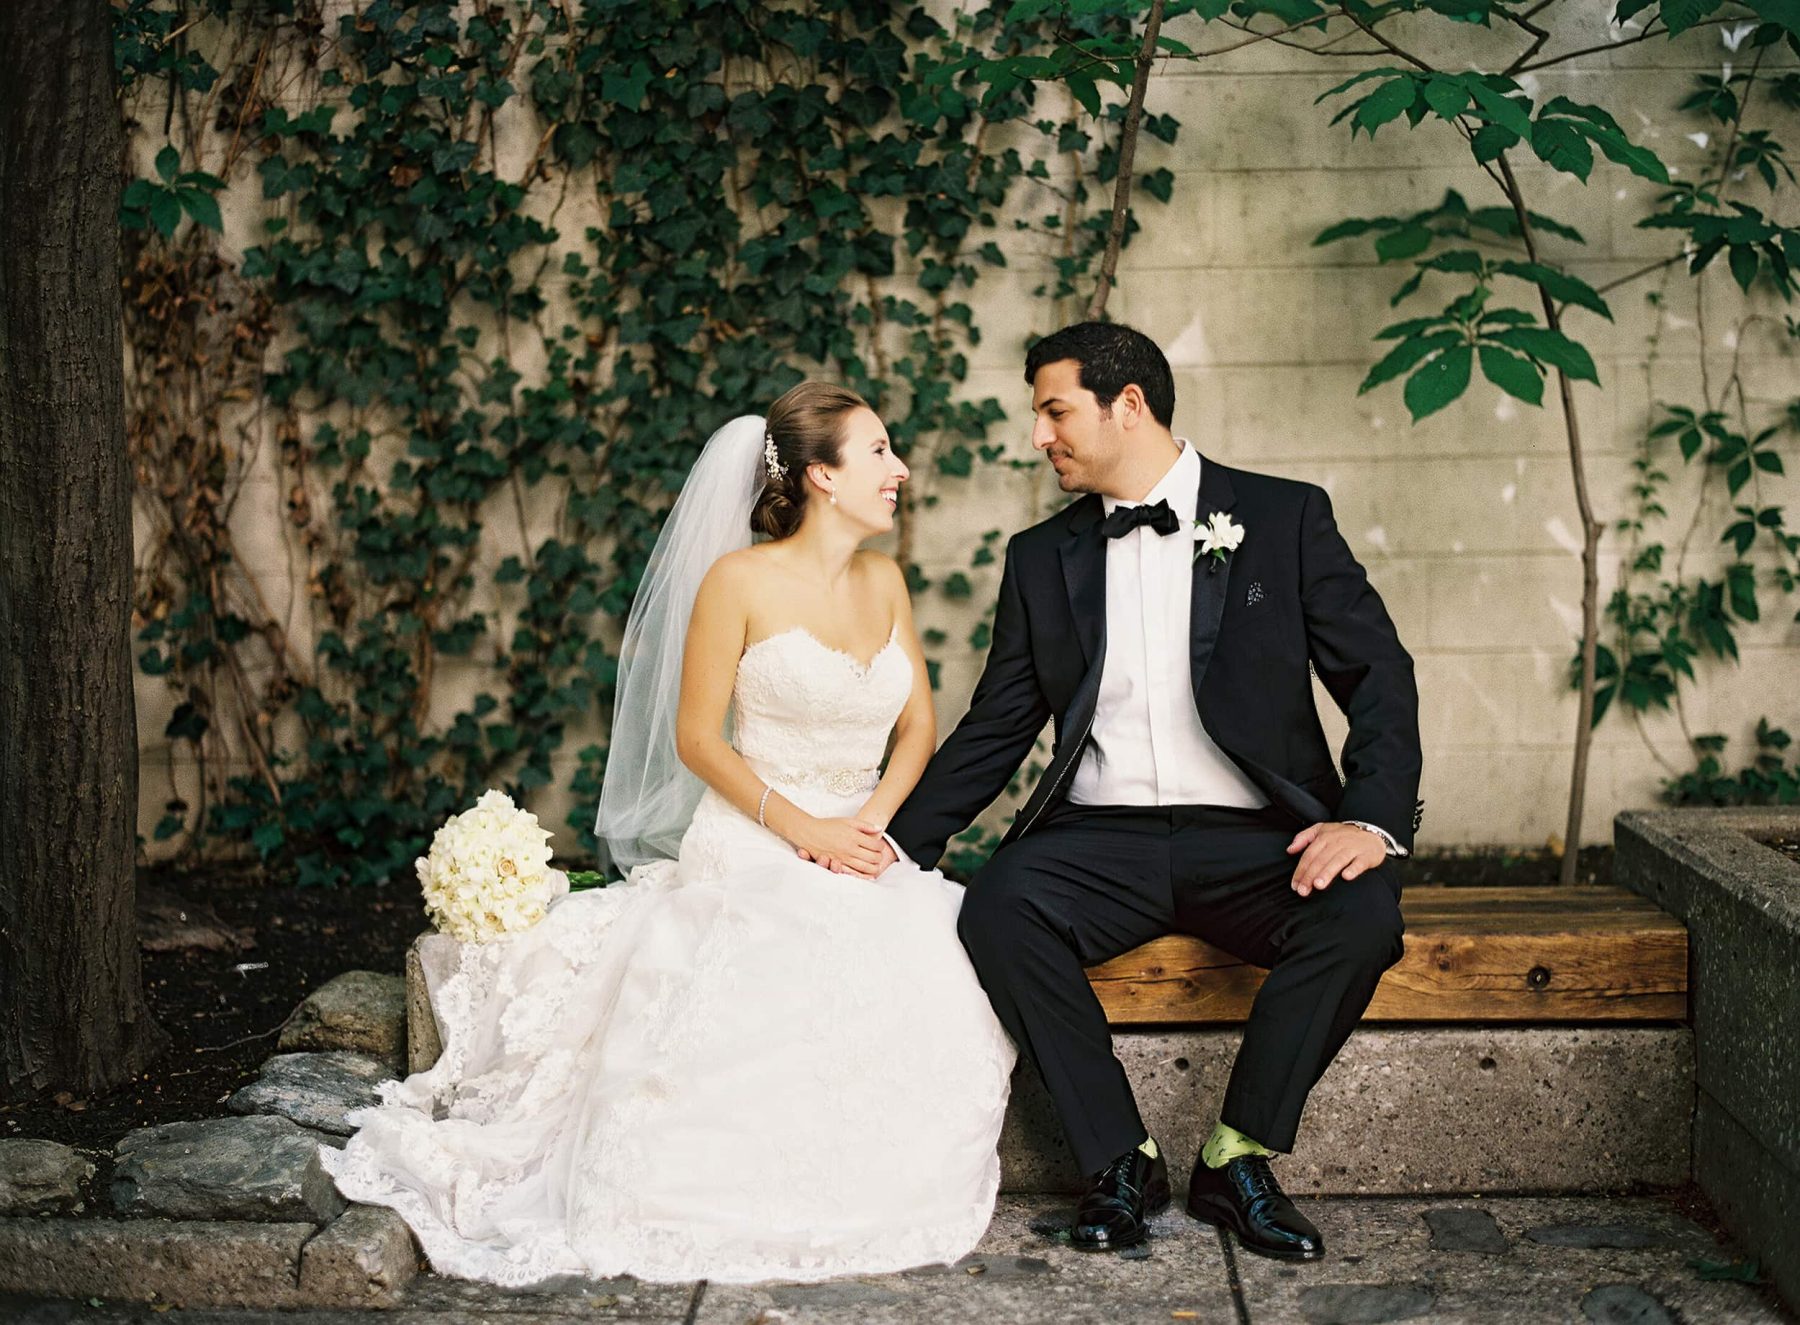 Bride and groom sitting outside on a bench